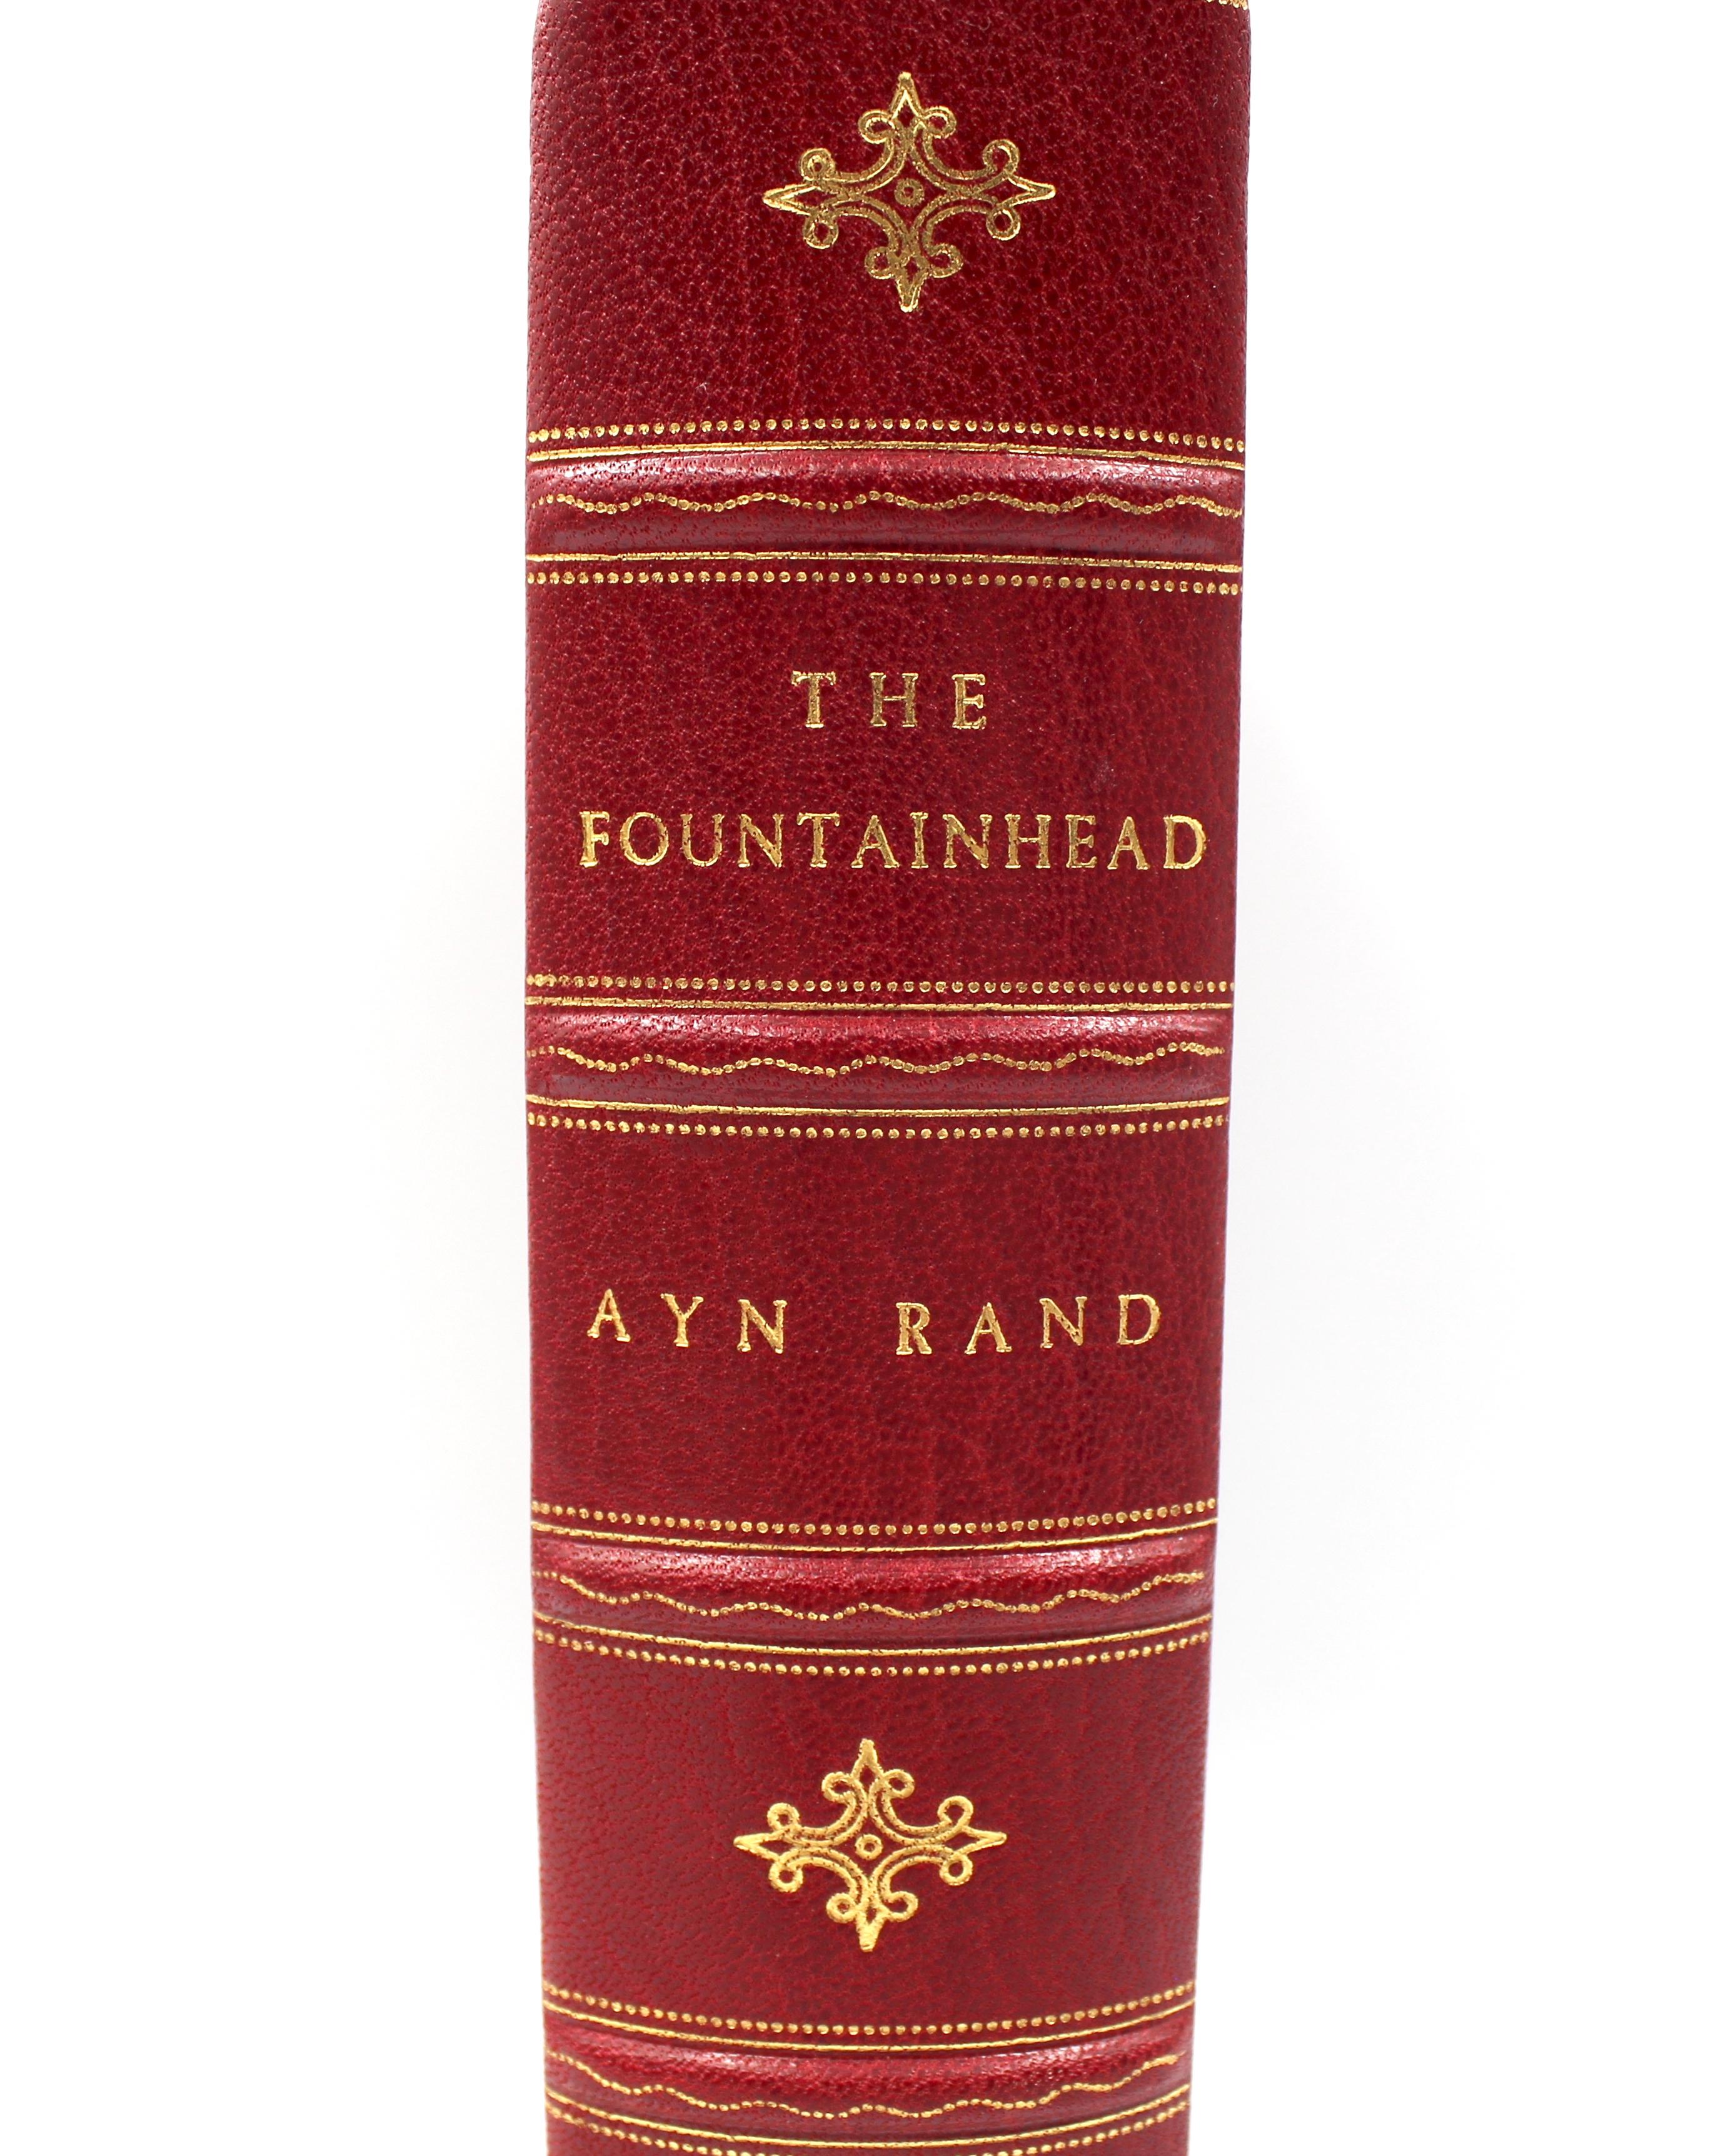 Mid-20th Century The Fountainhead by Ayn Rand, First Edition, 1943